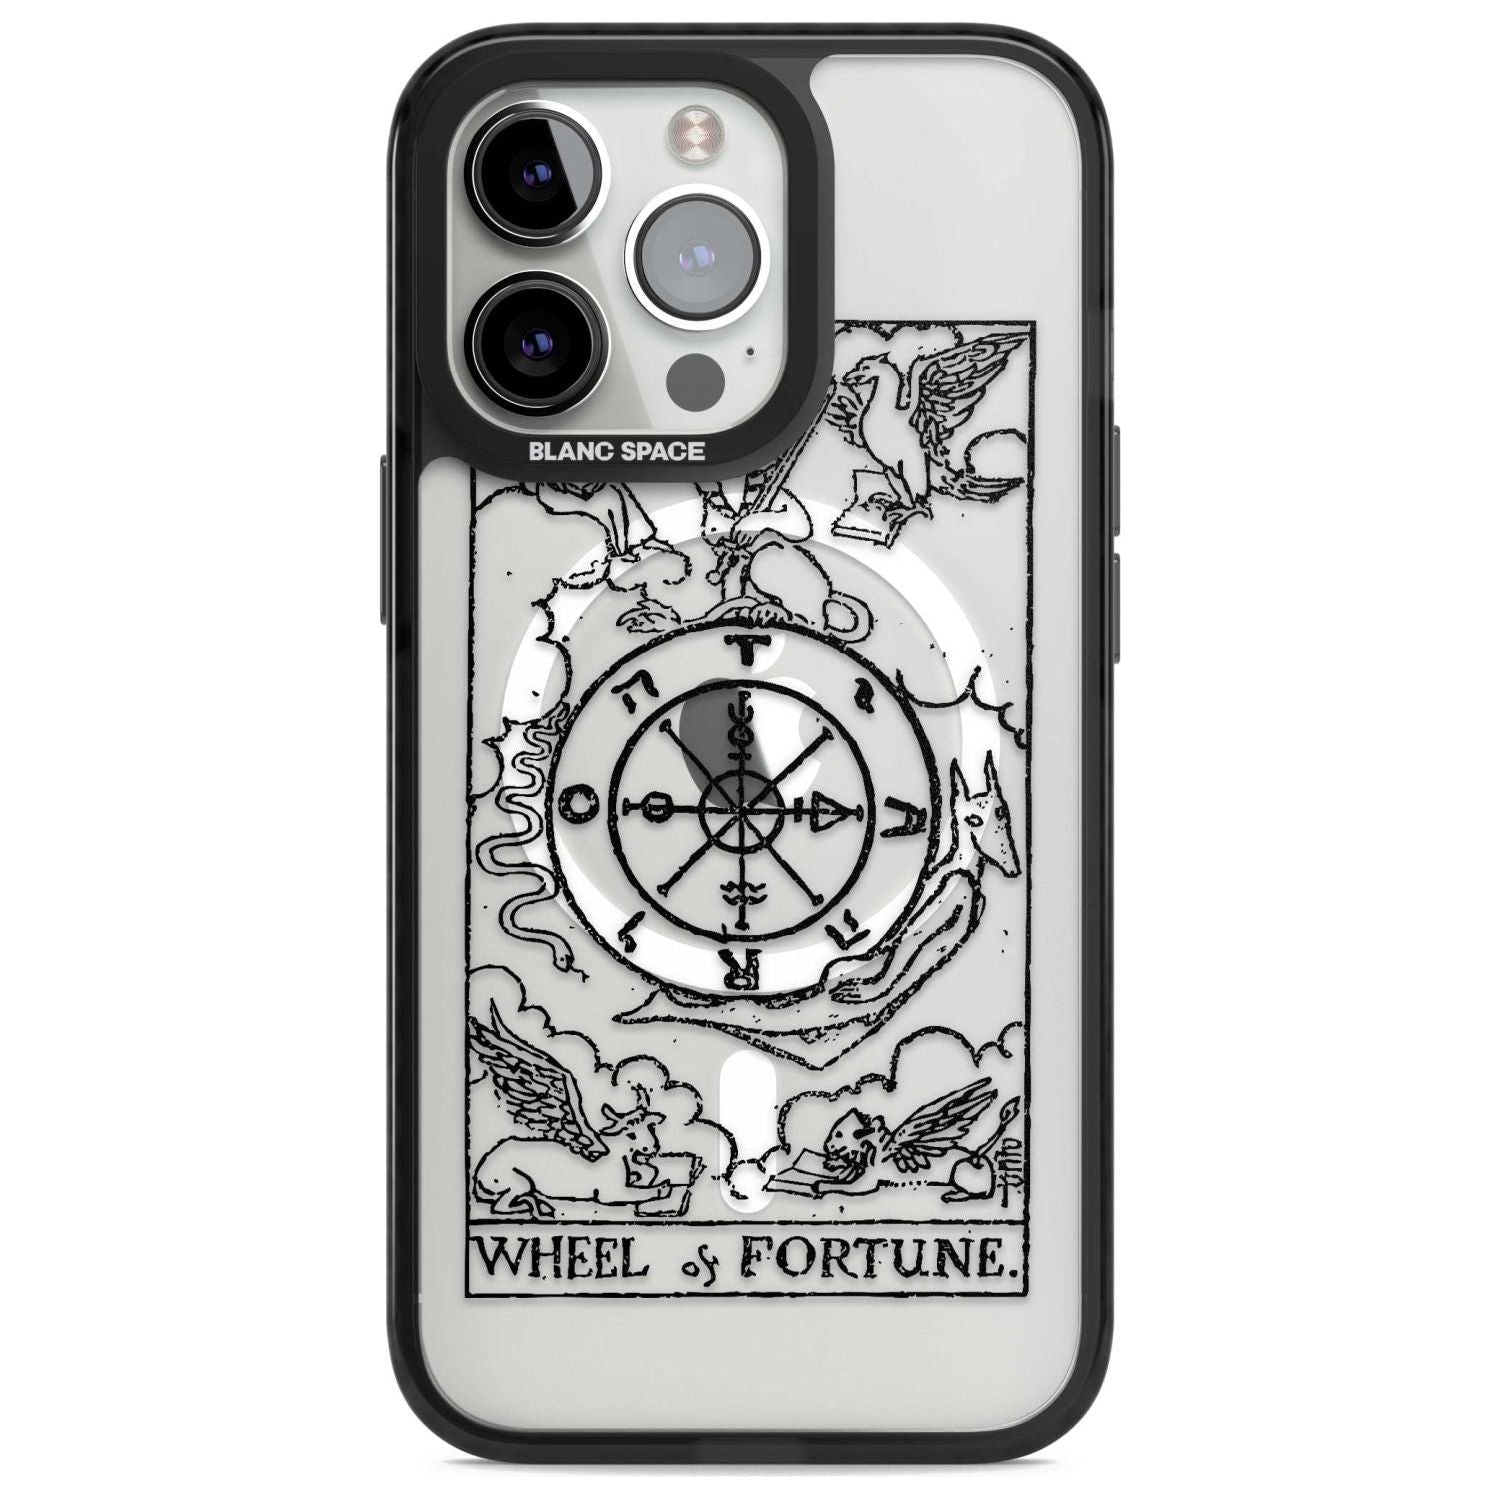 Personalised Wheel of Fortune Tarot Card - Transparent Custom Phone Case iPhone 15 Pro Max / Magsafe Black Impact Case,iPhone 15 Pro / Magsafe Black Impact Case,iPhone 14 Pro Max / Magsafe Black Impact Case,iPhone 14 Pro / Magsafe Black Impact Case,iPhone 13 Pro / Magsafe Black Impact Case Blanc Space